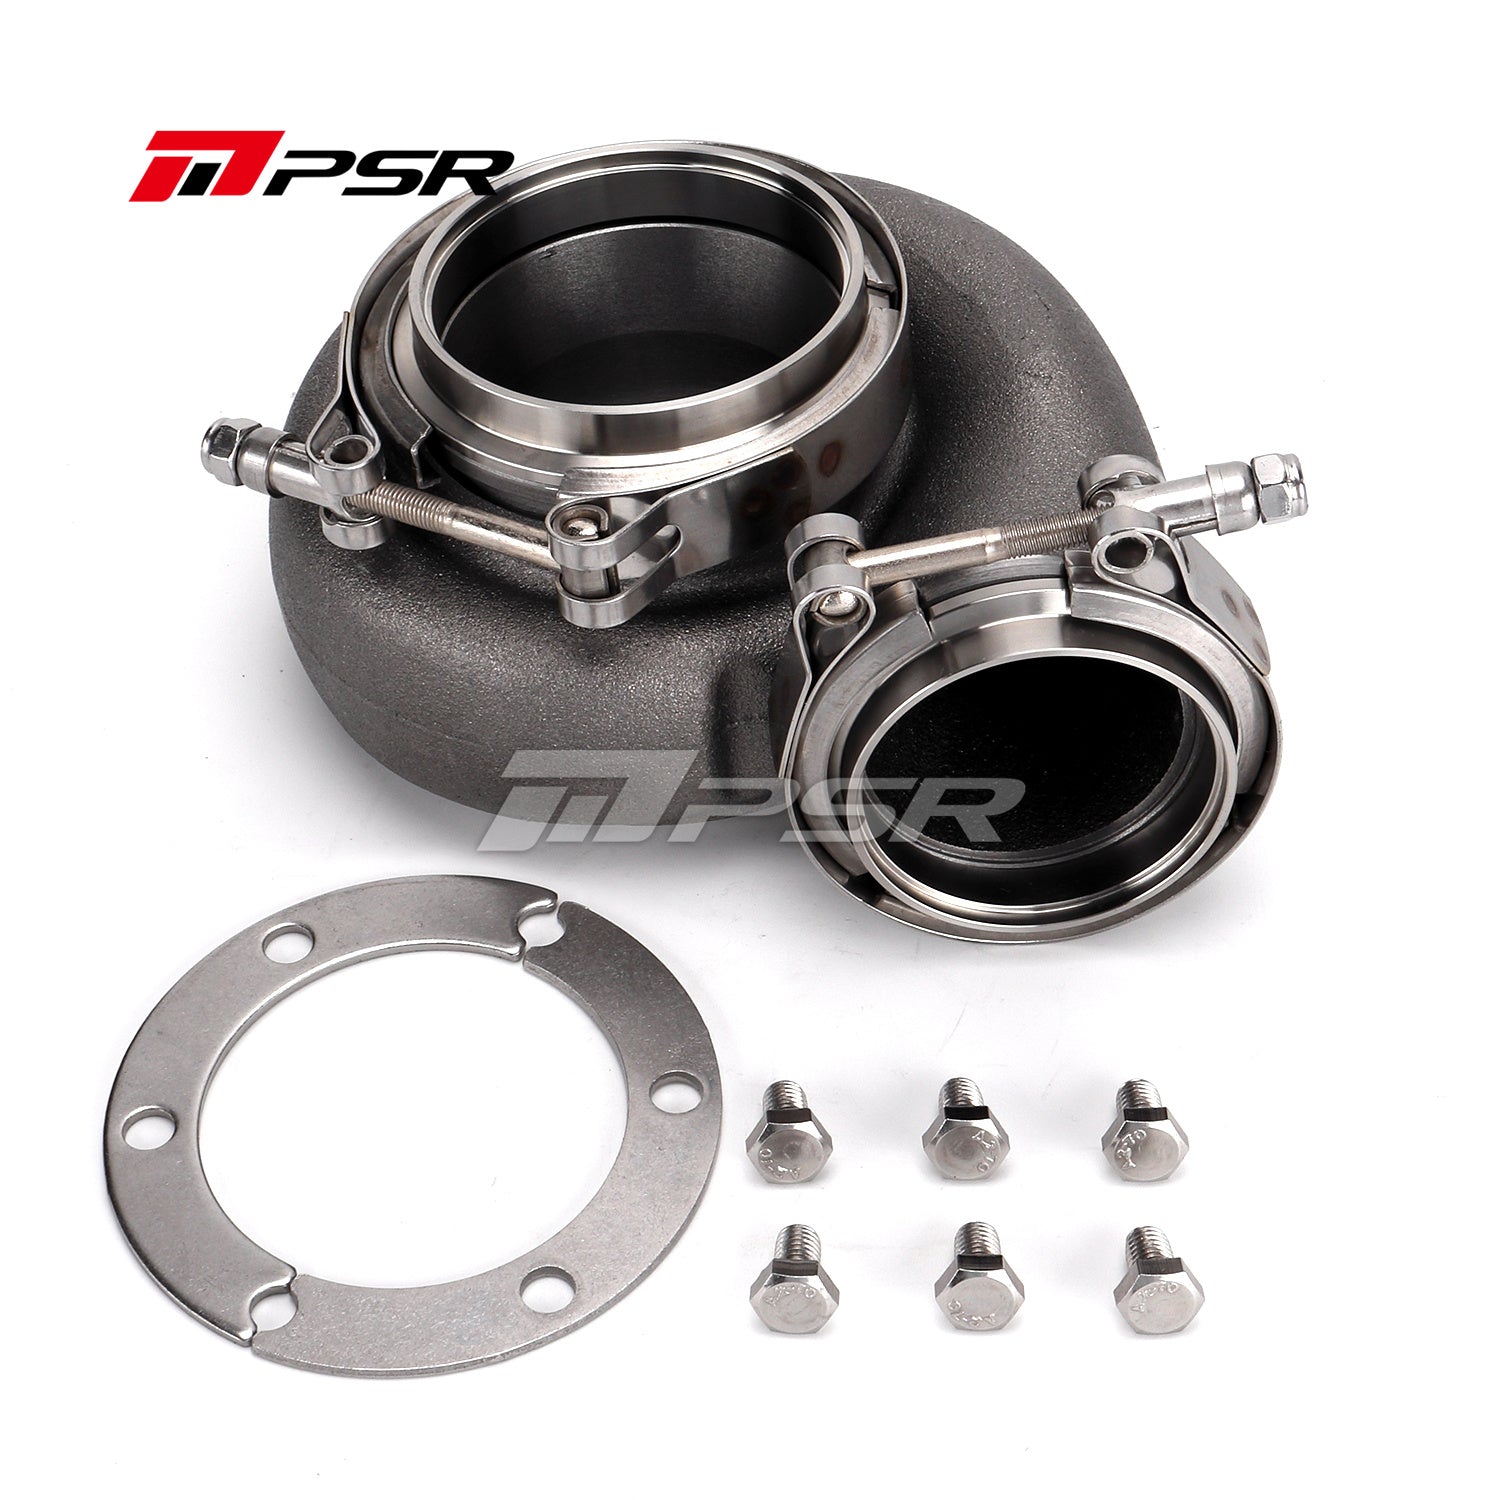 PSR Turbine Housing for 75G and G42- Turbos